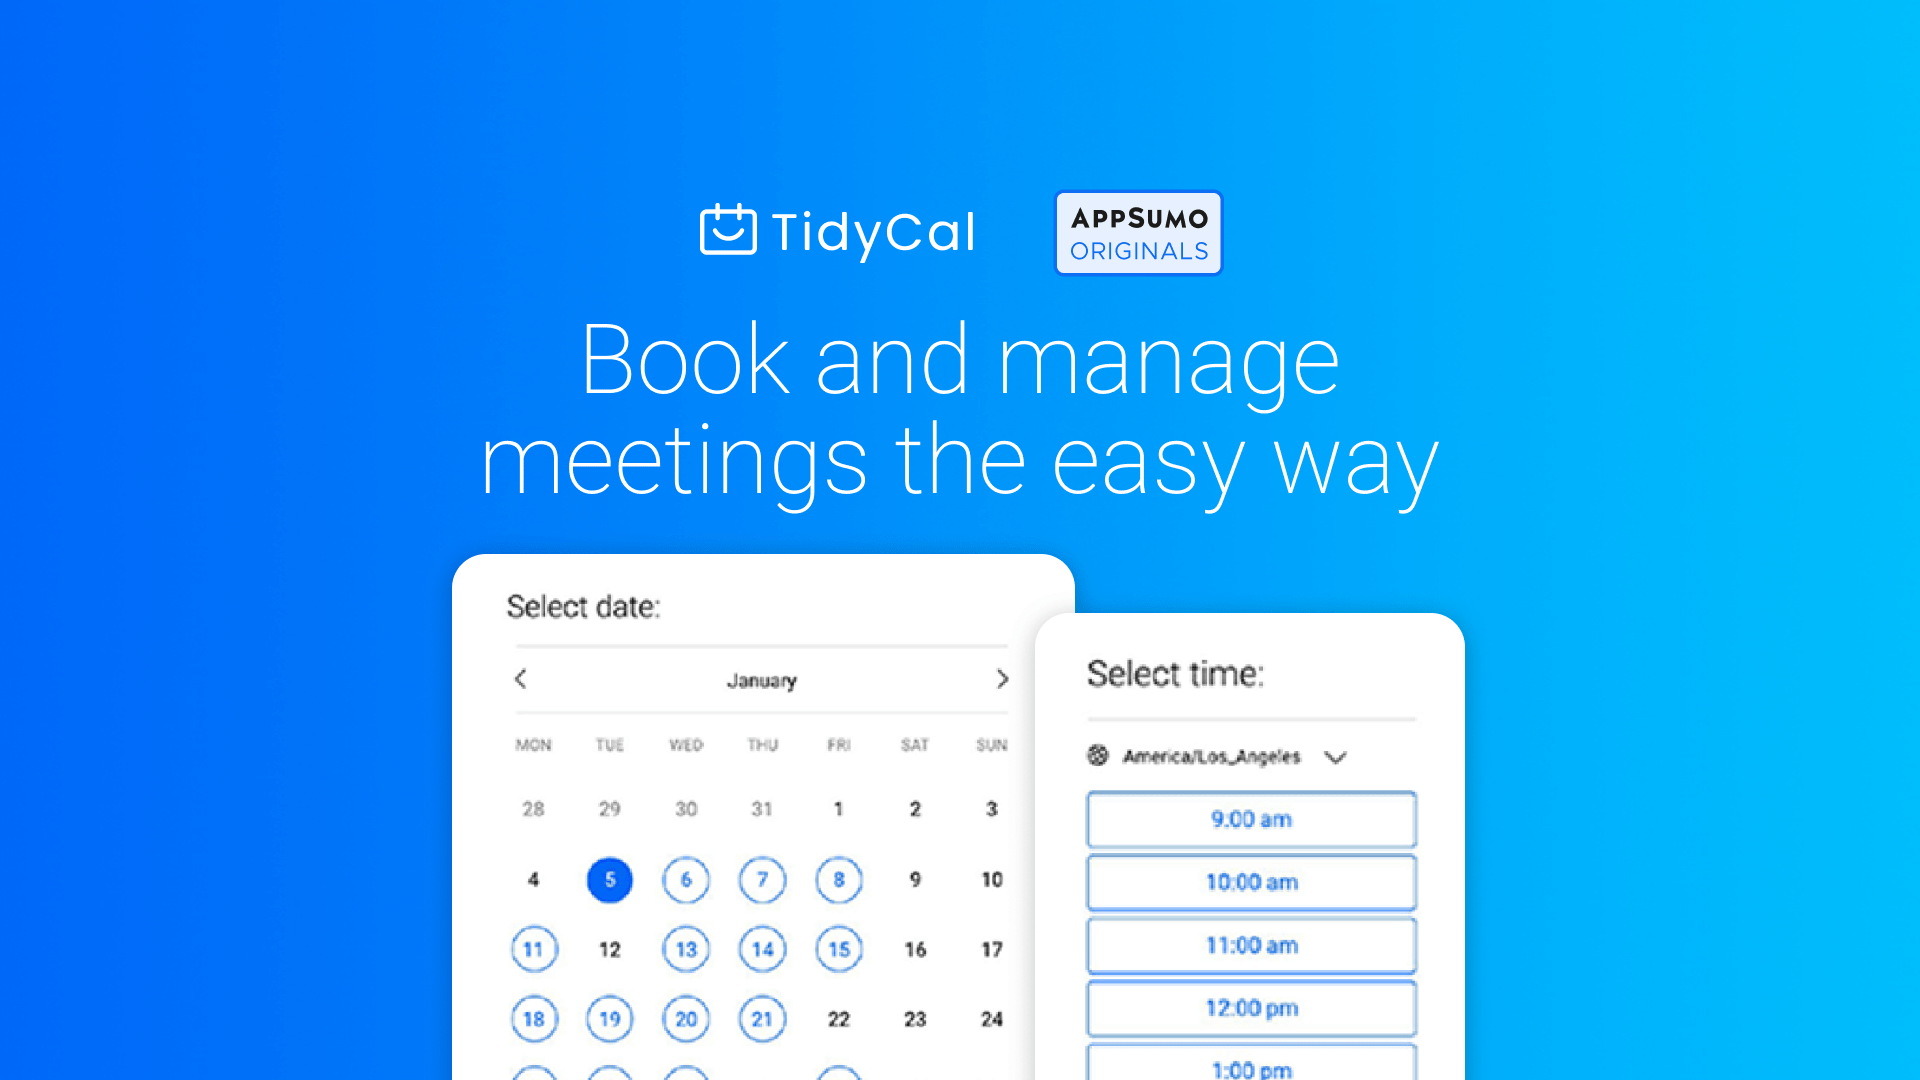 TidyCal – Book and manage meetings easily